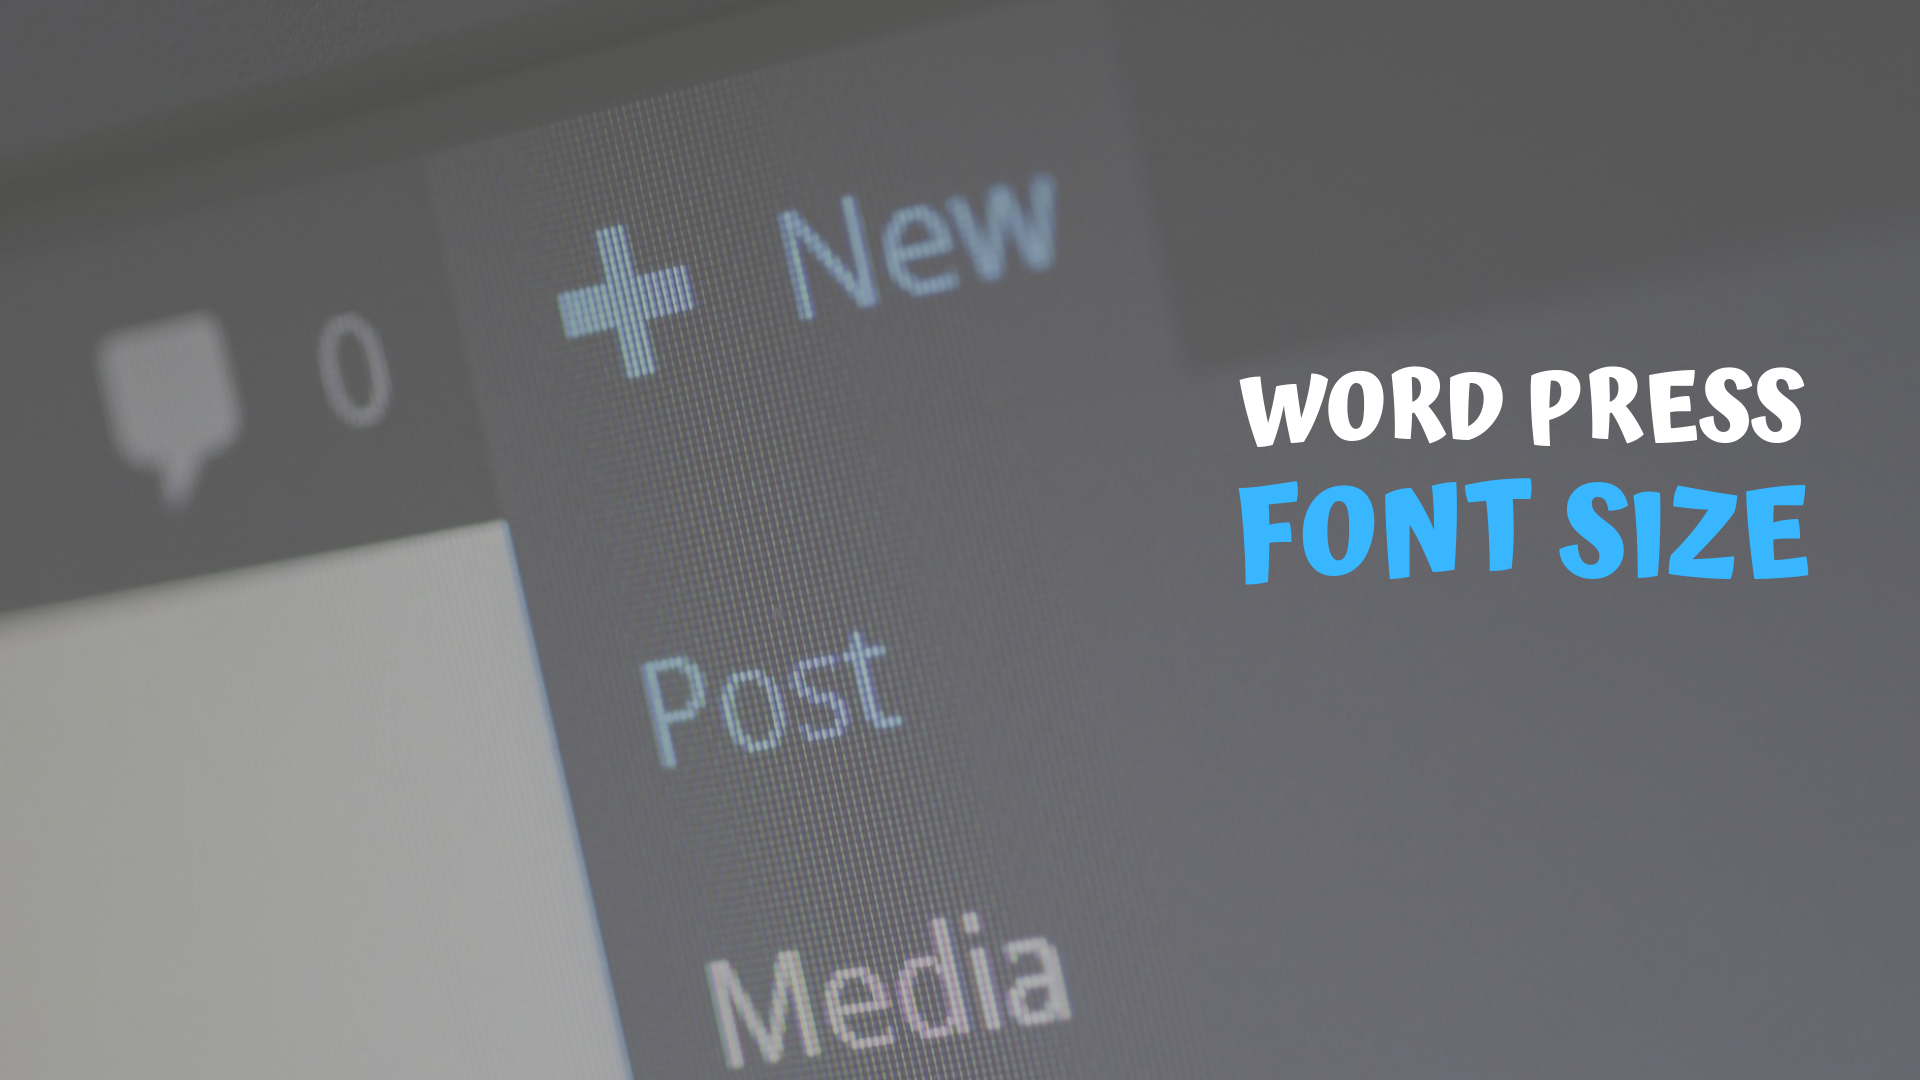 HOW TO CHANGE WORDPRESS FONT SIZE